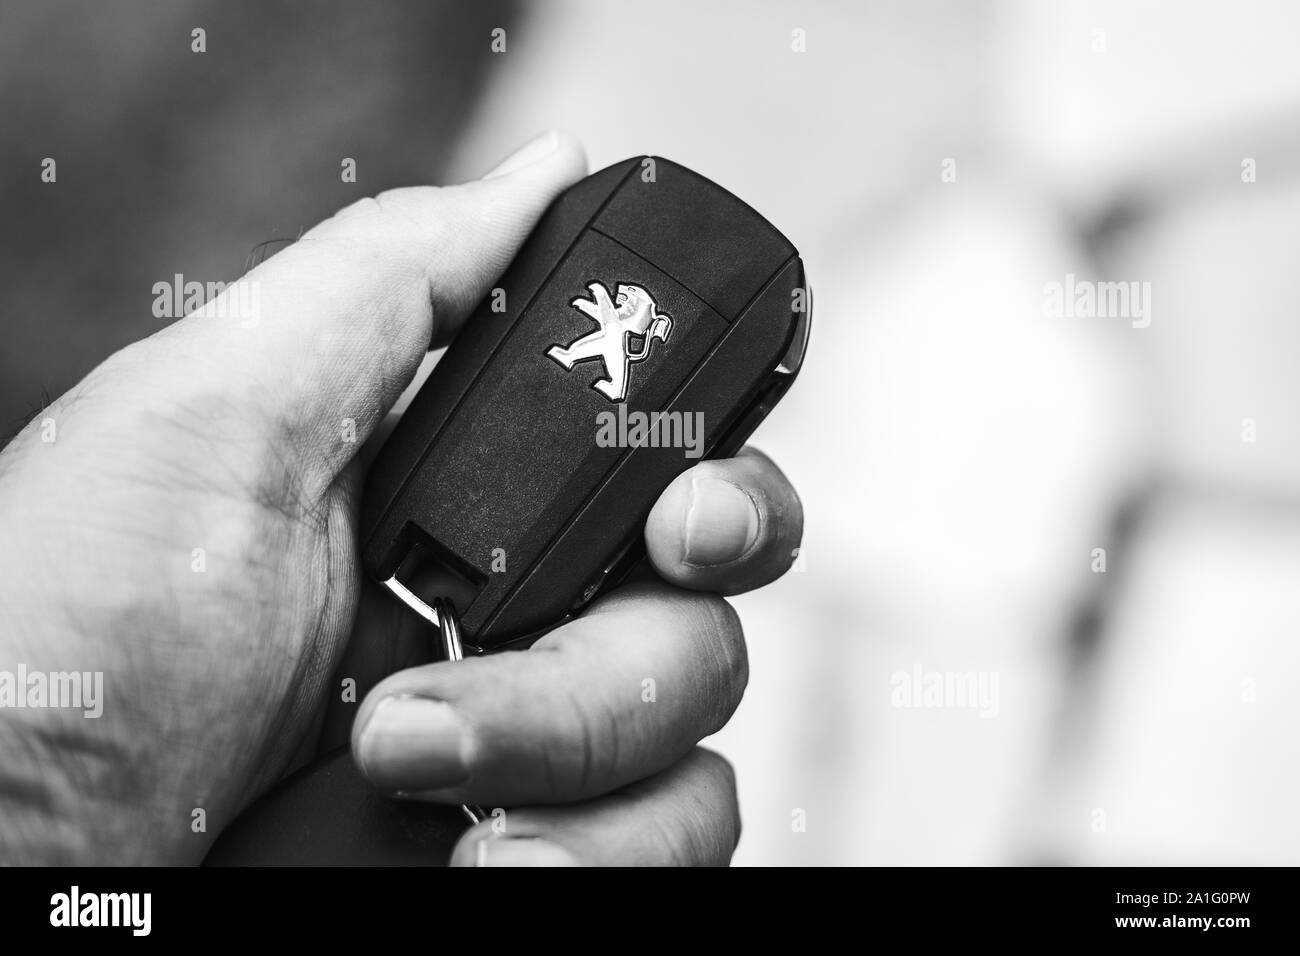 Photo of a car key with Peugeot brand symbol Stock Photo - Alamy